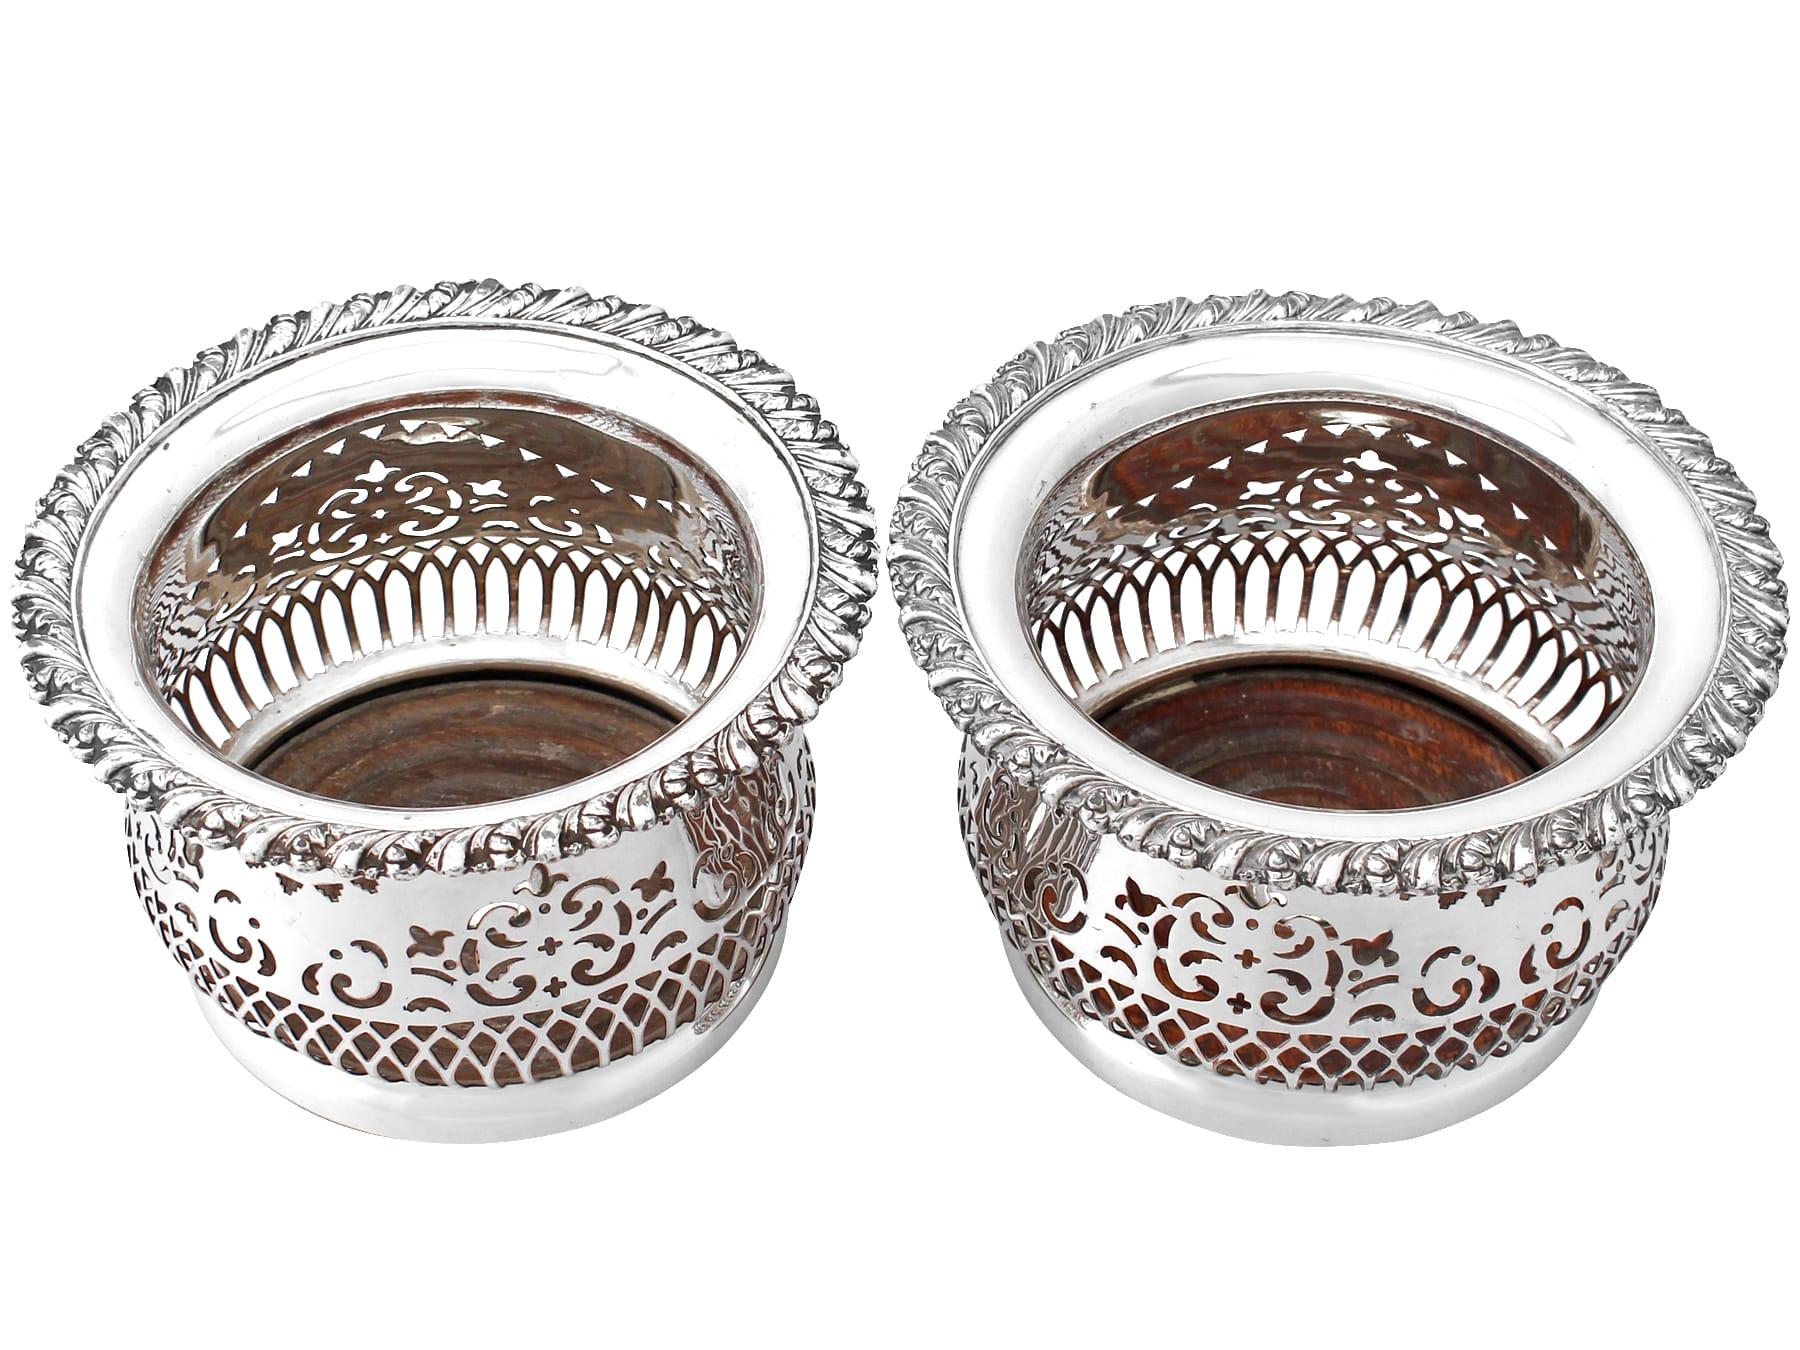 A very good pair of antique electroplated silver bottle coasters; part of our wine and drinks related collection.

These antique electroplated silver bottle coasters have a circular rounded form.

The body of each coaster is encircled with pierced